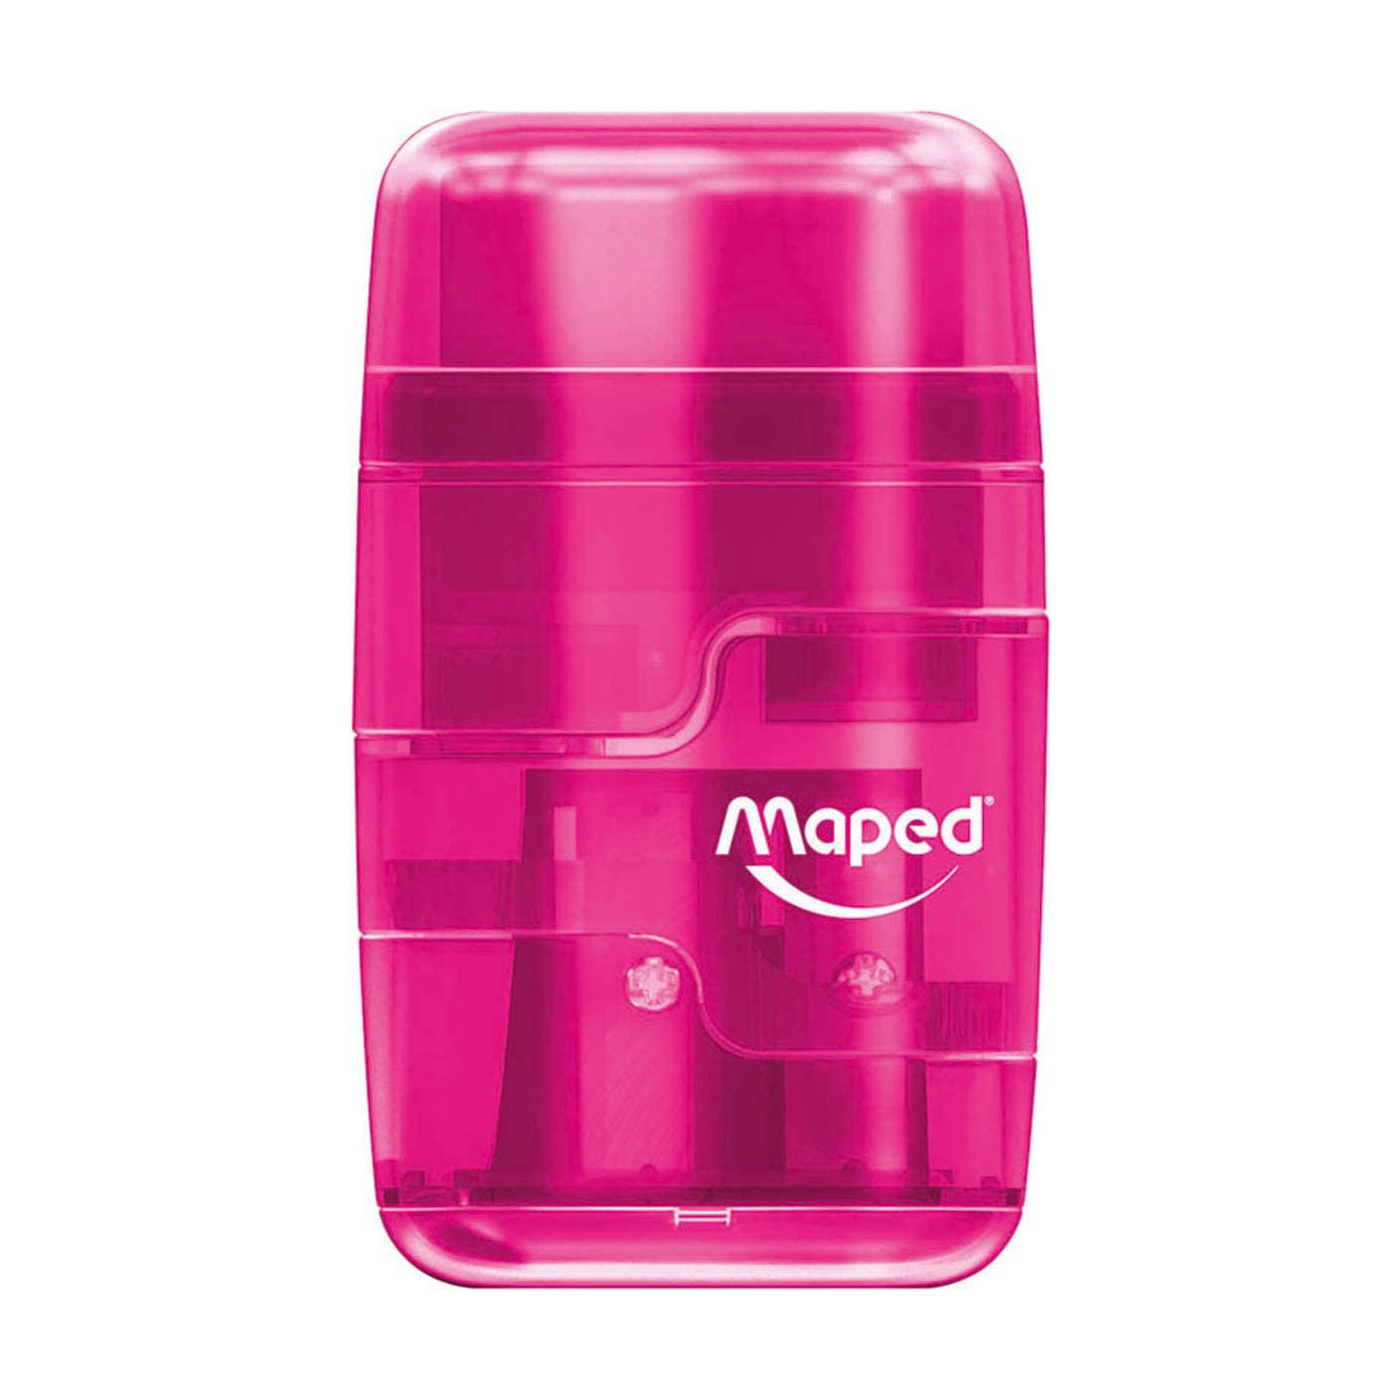 Maped Connect 2 Hole Pencil Sharpener & Eraser With Cannister Pink